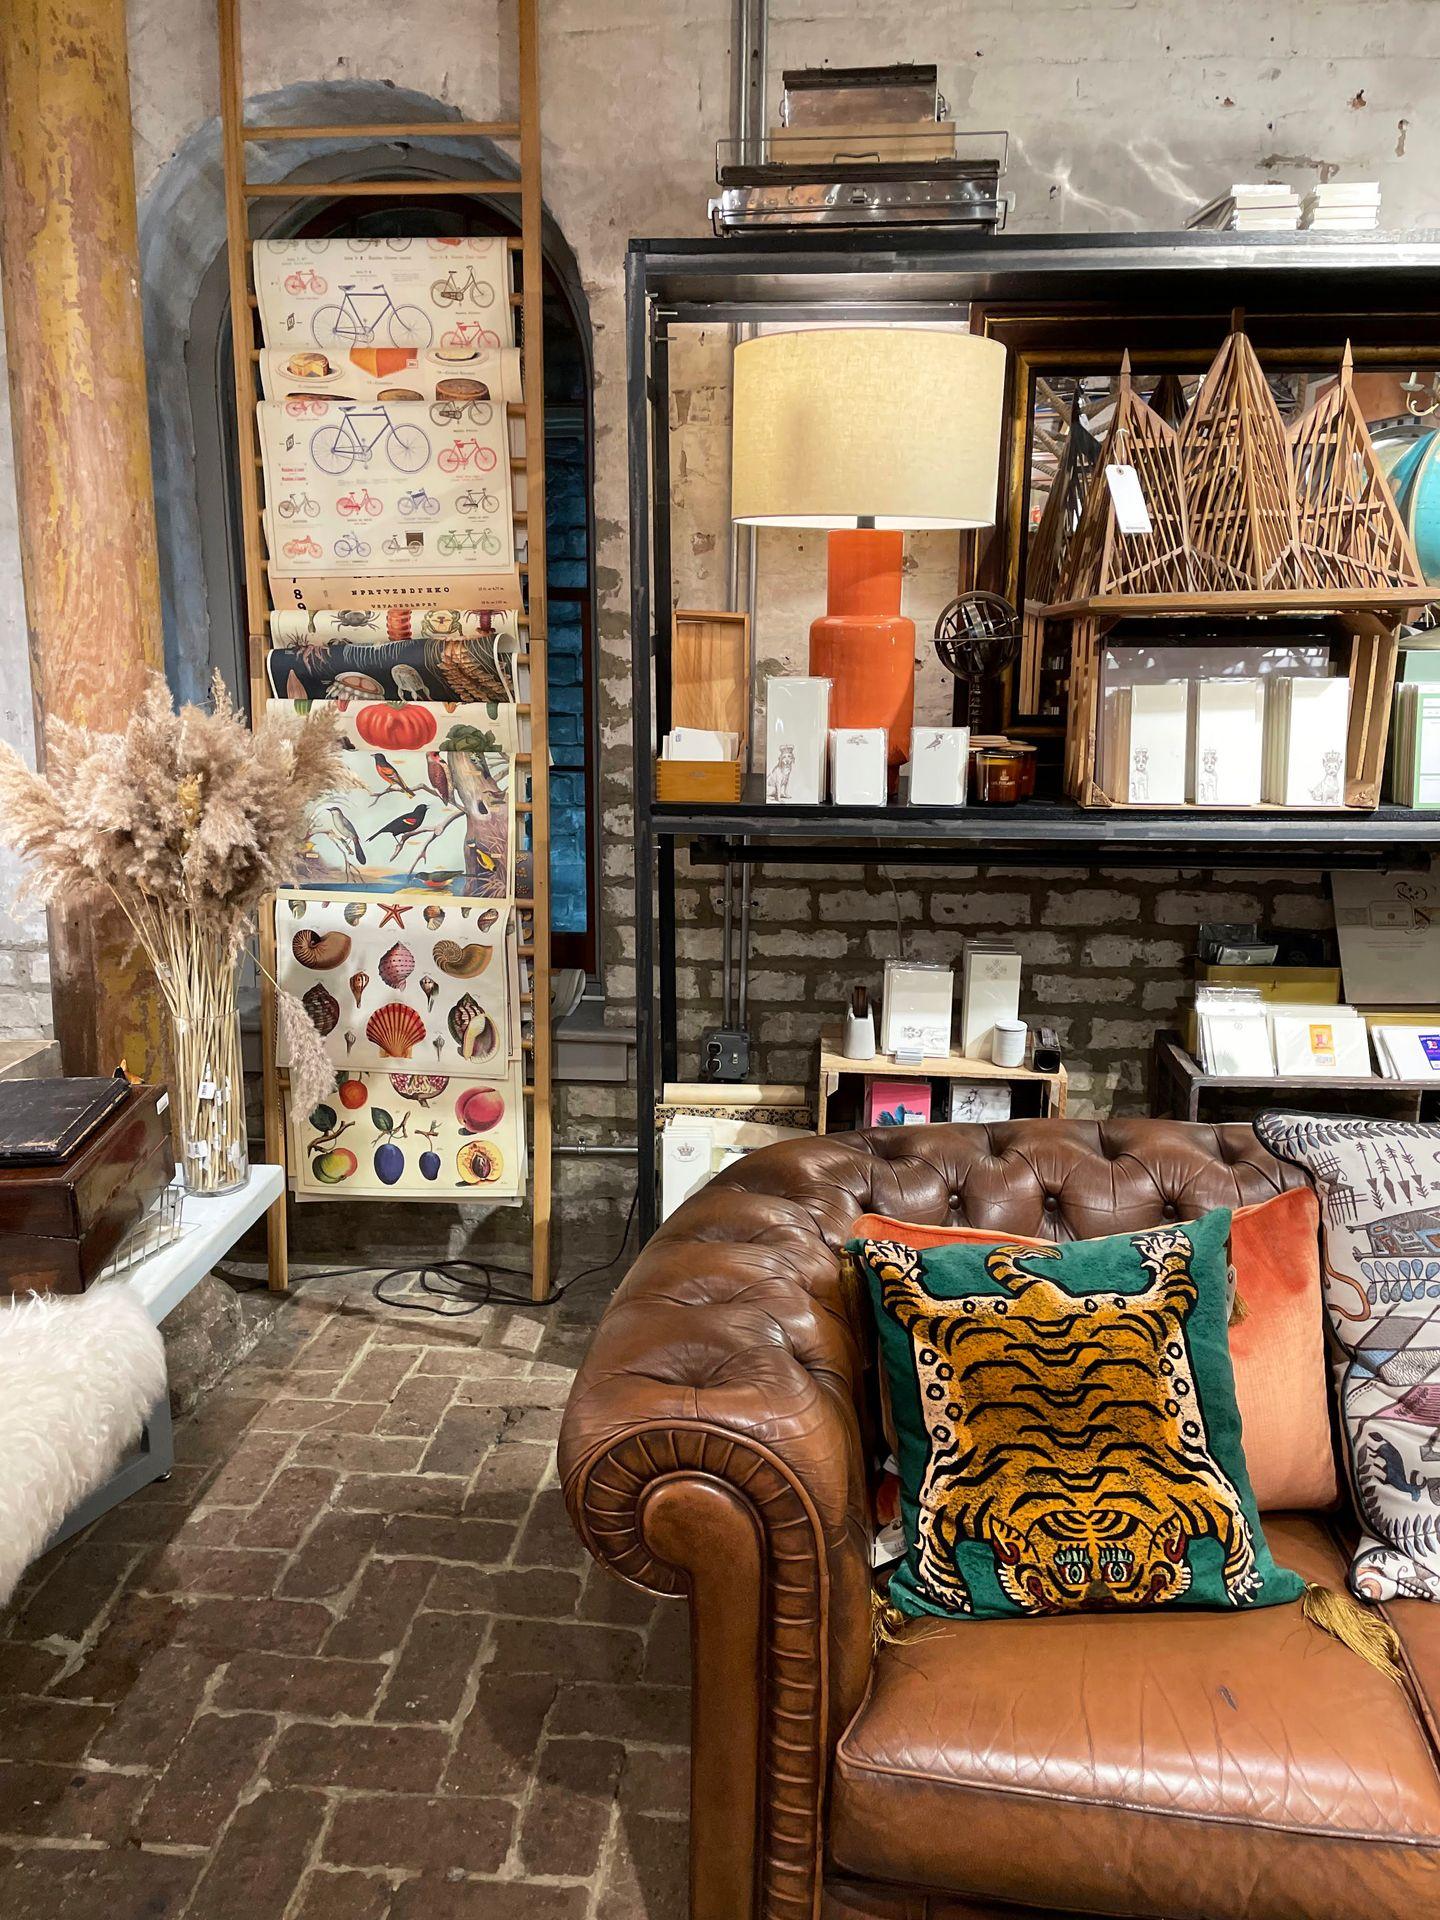 The interior of the Paris Market boutique. There is a brown couch with pillows, lights and artwork in the background.